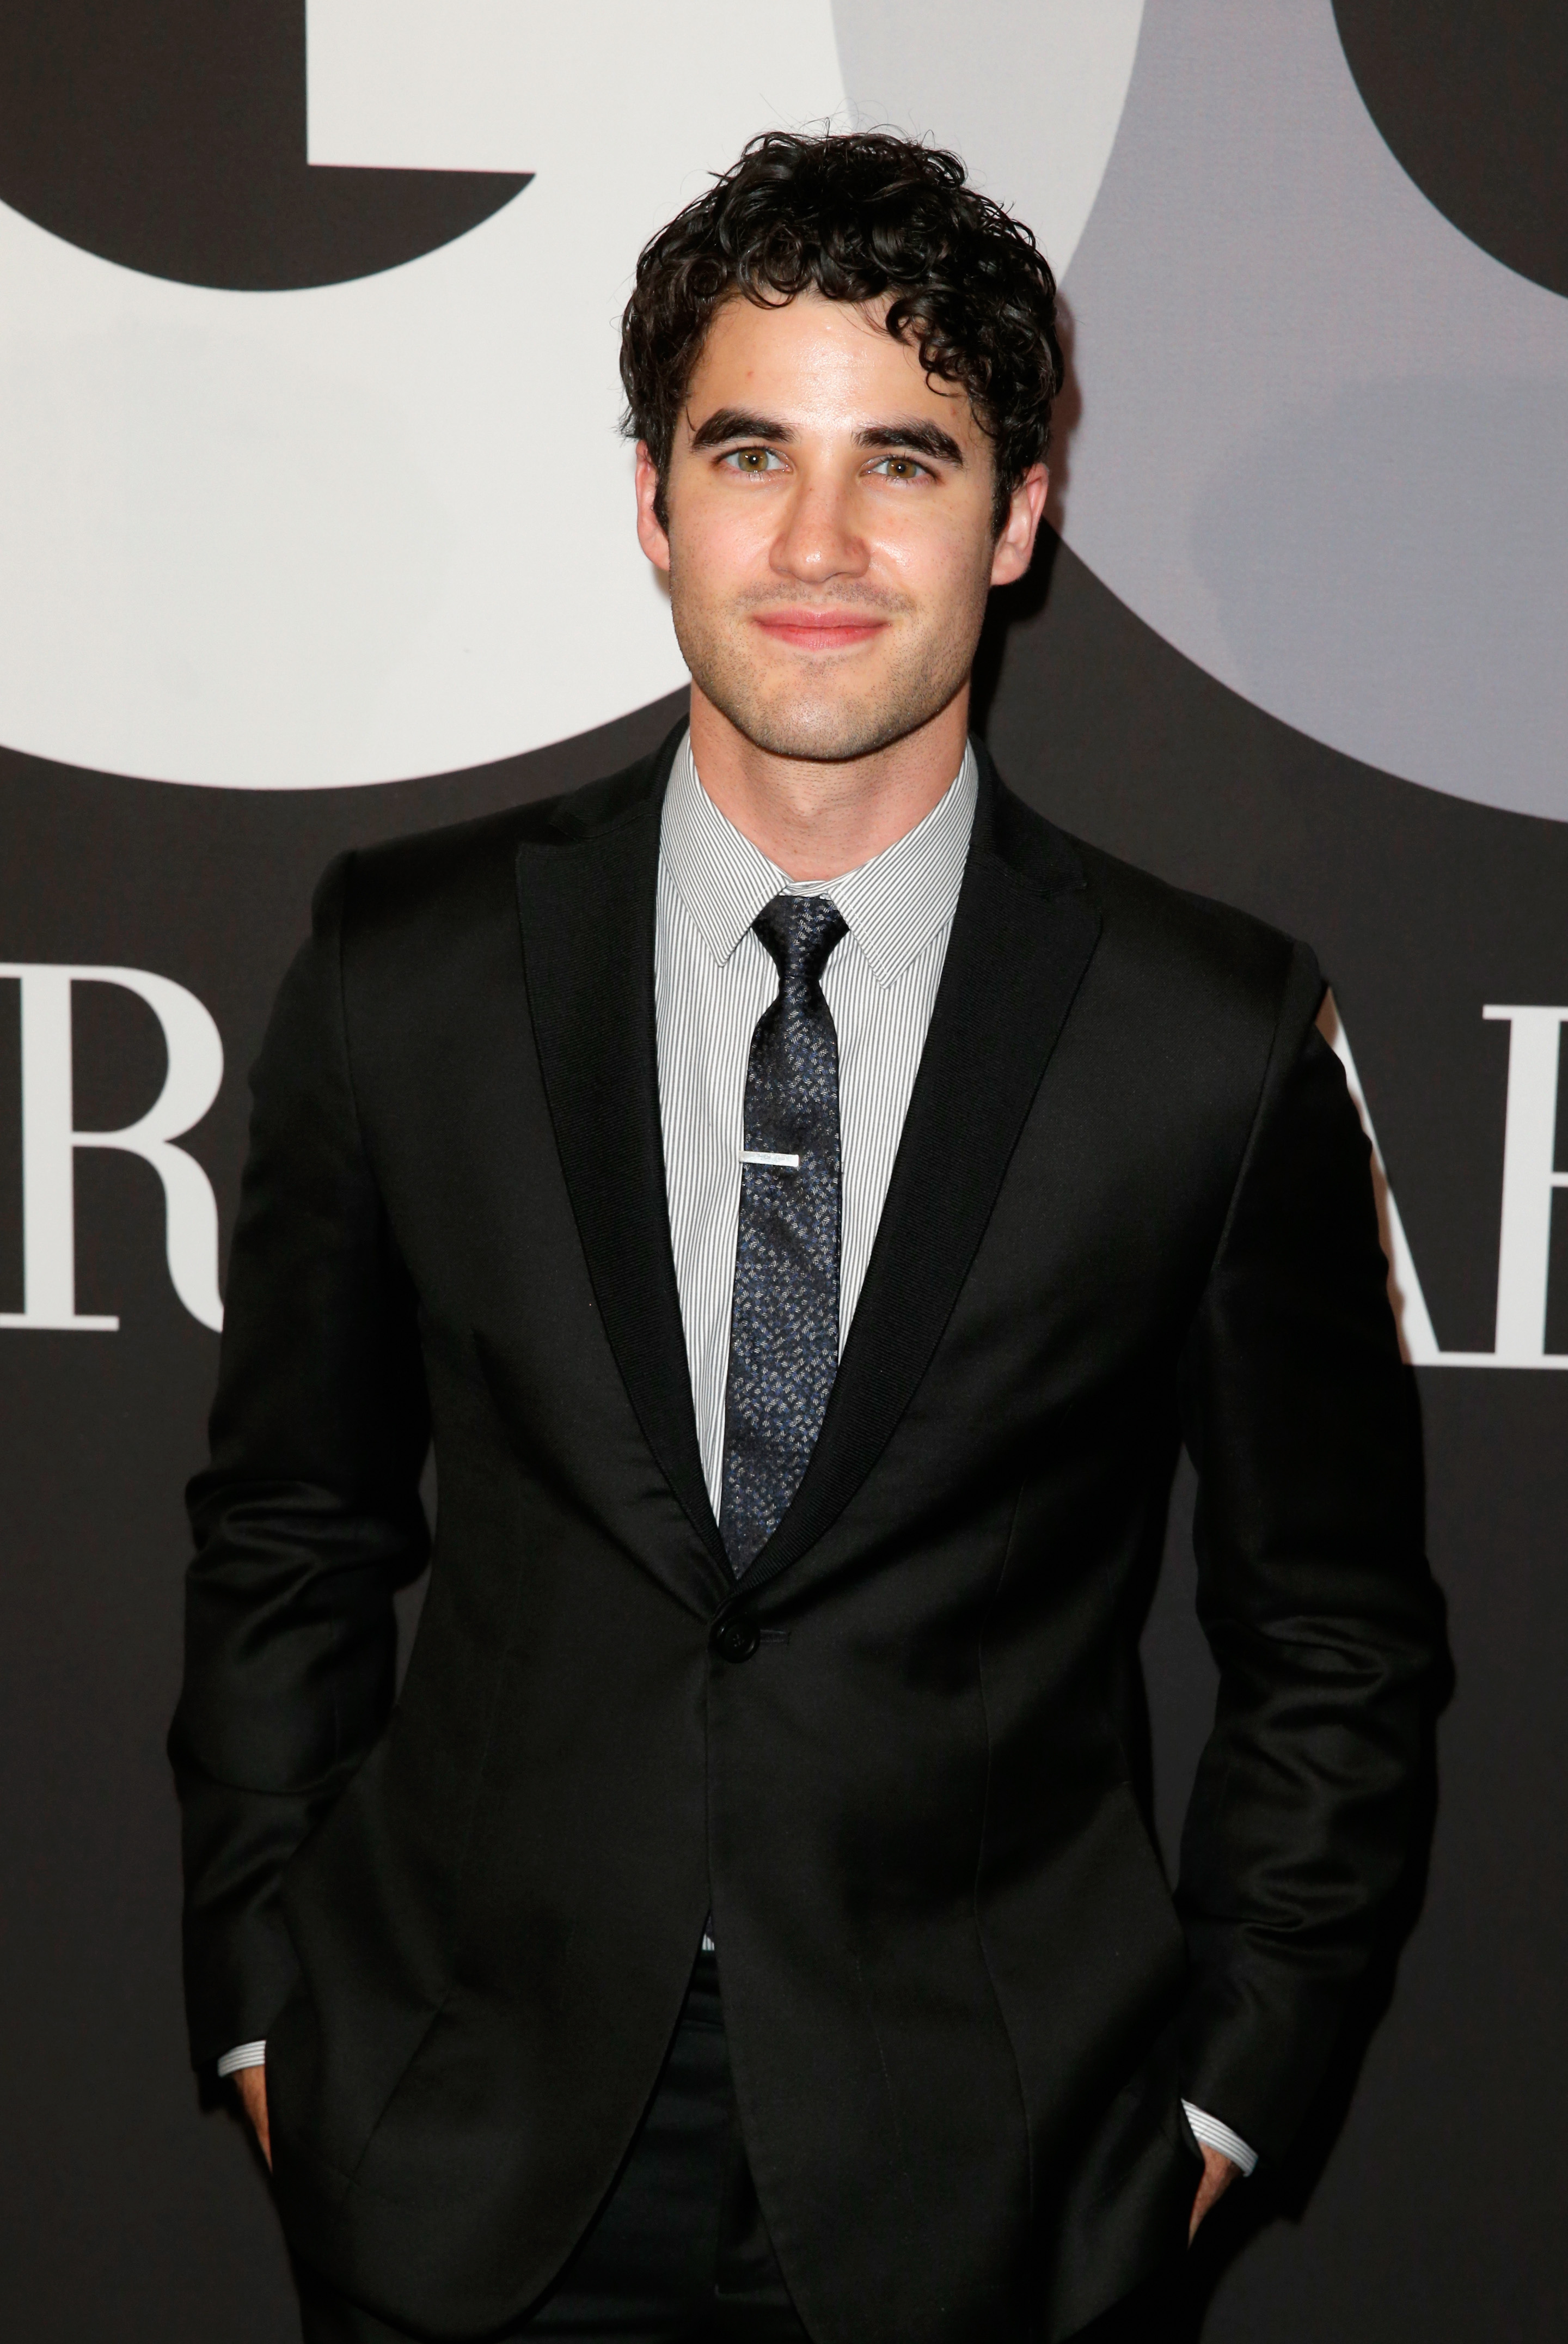 Darren Criss attends GQ and Giorgio Armani Grammys After Party in Hollywood, Calif. on Feb. 8, 2015.